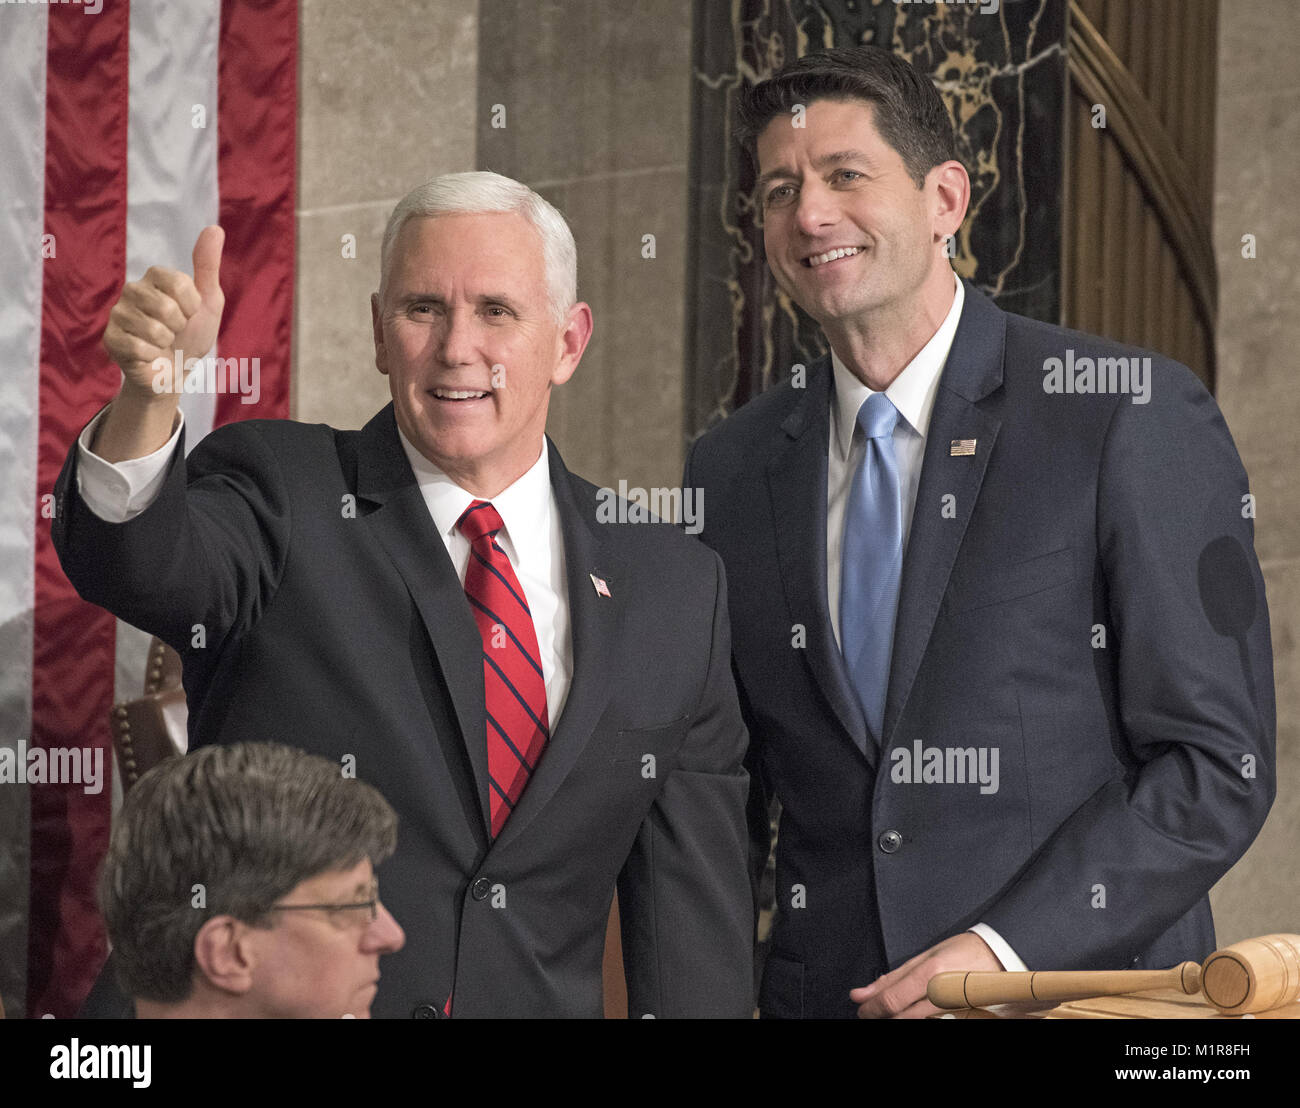 Washington, District of Columbia, USA. 30th Jan, 2018. United States Vice President Mike Pence, left, and Speaker of the US House of Representatives Paul Ryan (Republican of Wisconsin), right, gesture towards guests in the Speaker's gallery prior to the arrival of US President Donald J. Trump who will deliver his first State of the Union address to a joint session of the US Congress in the US House chamber in the US Capitol in Washington, DC on Tuesday, January 30, 2018.Credit: Ron Sachs/CNP Credit: Ron Sachs/CNP/ZUMA Wire/Alamy Live News Stock Photo